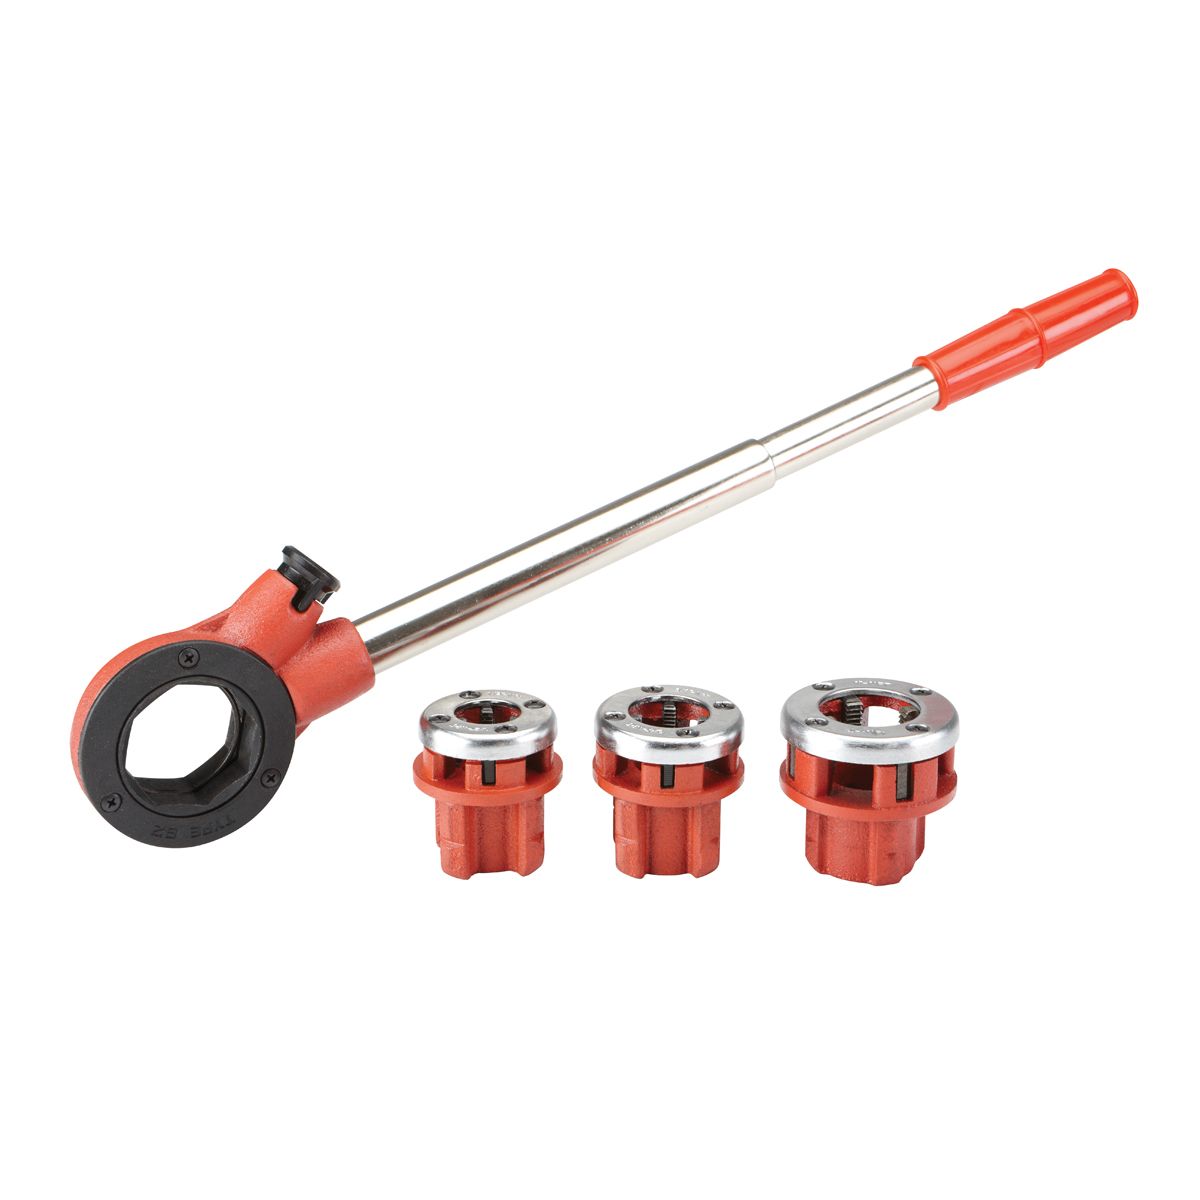 CENTRAL MACHINERY 1/2 in. - 1 in. Ratcheting Pipe Threader Set, 5 Piece